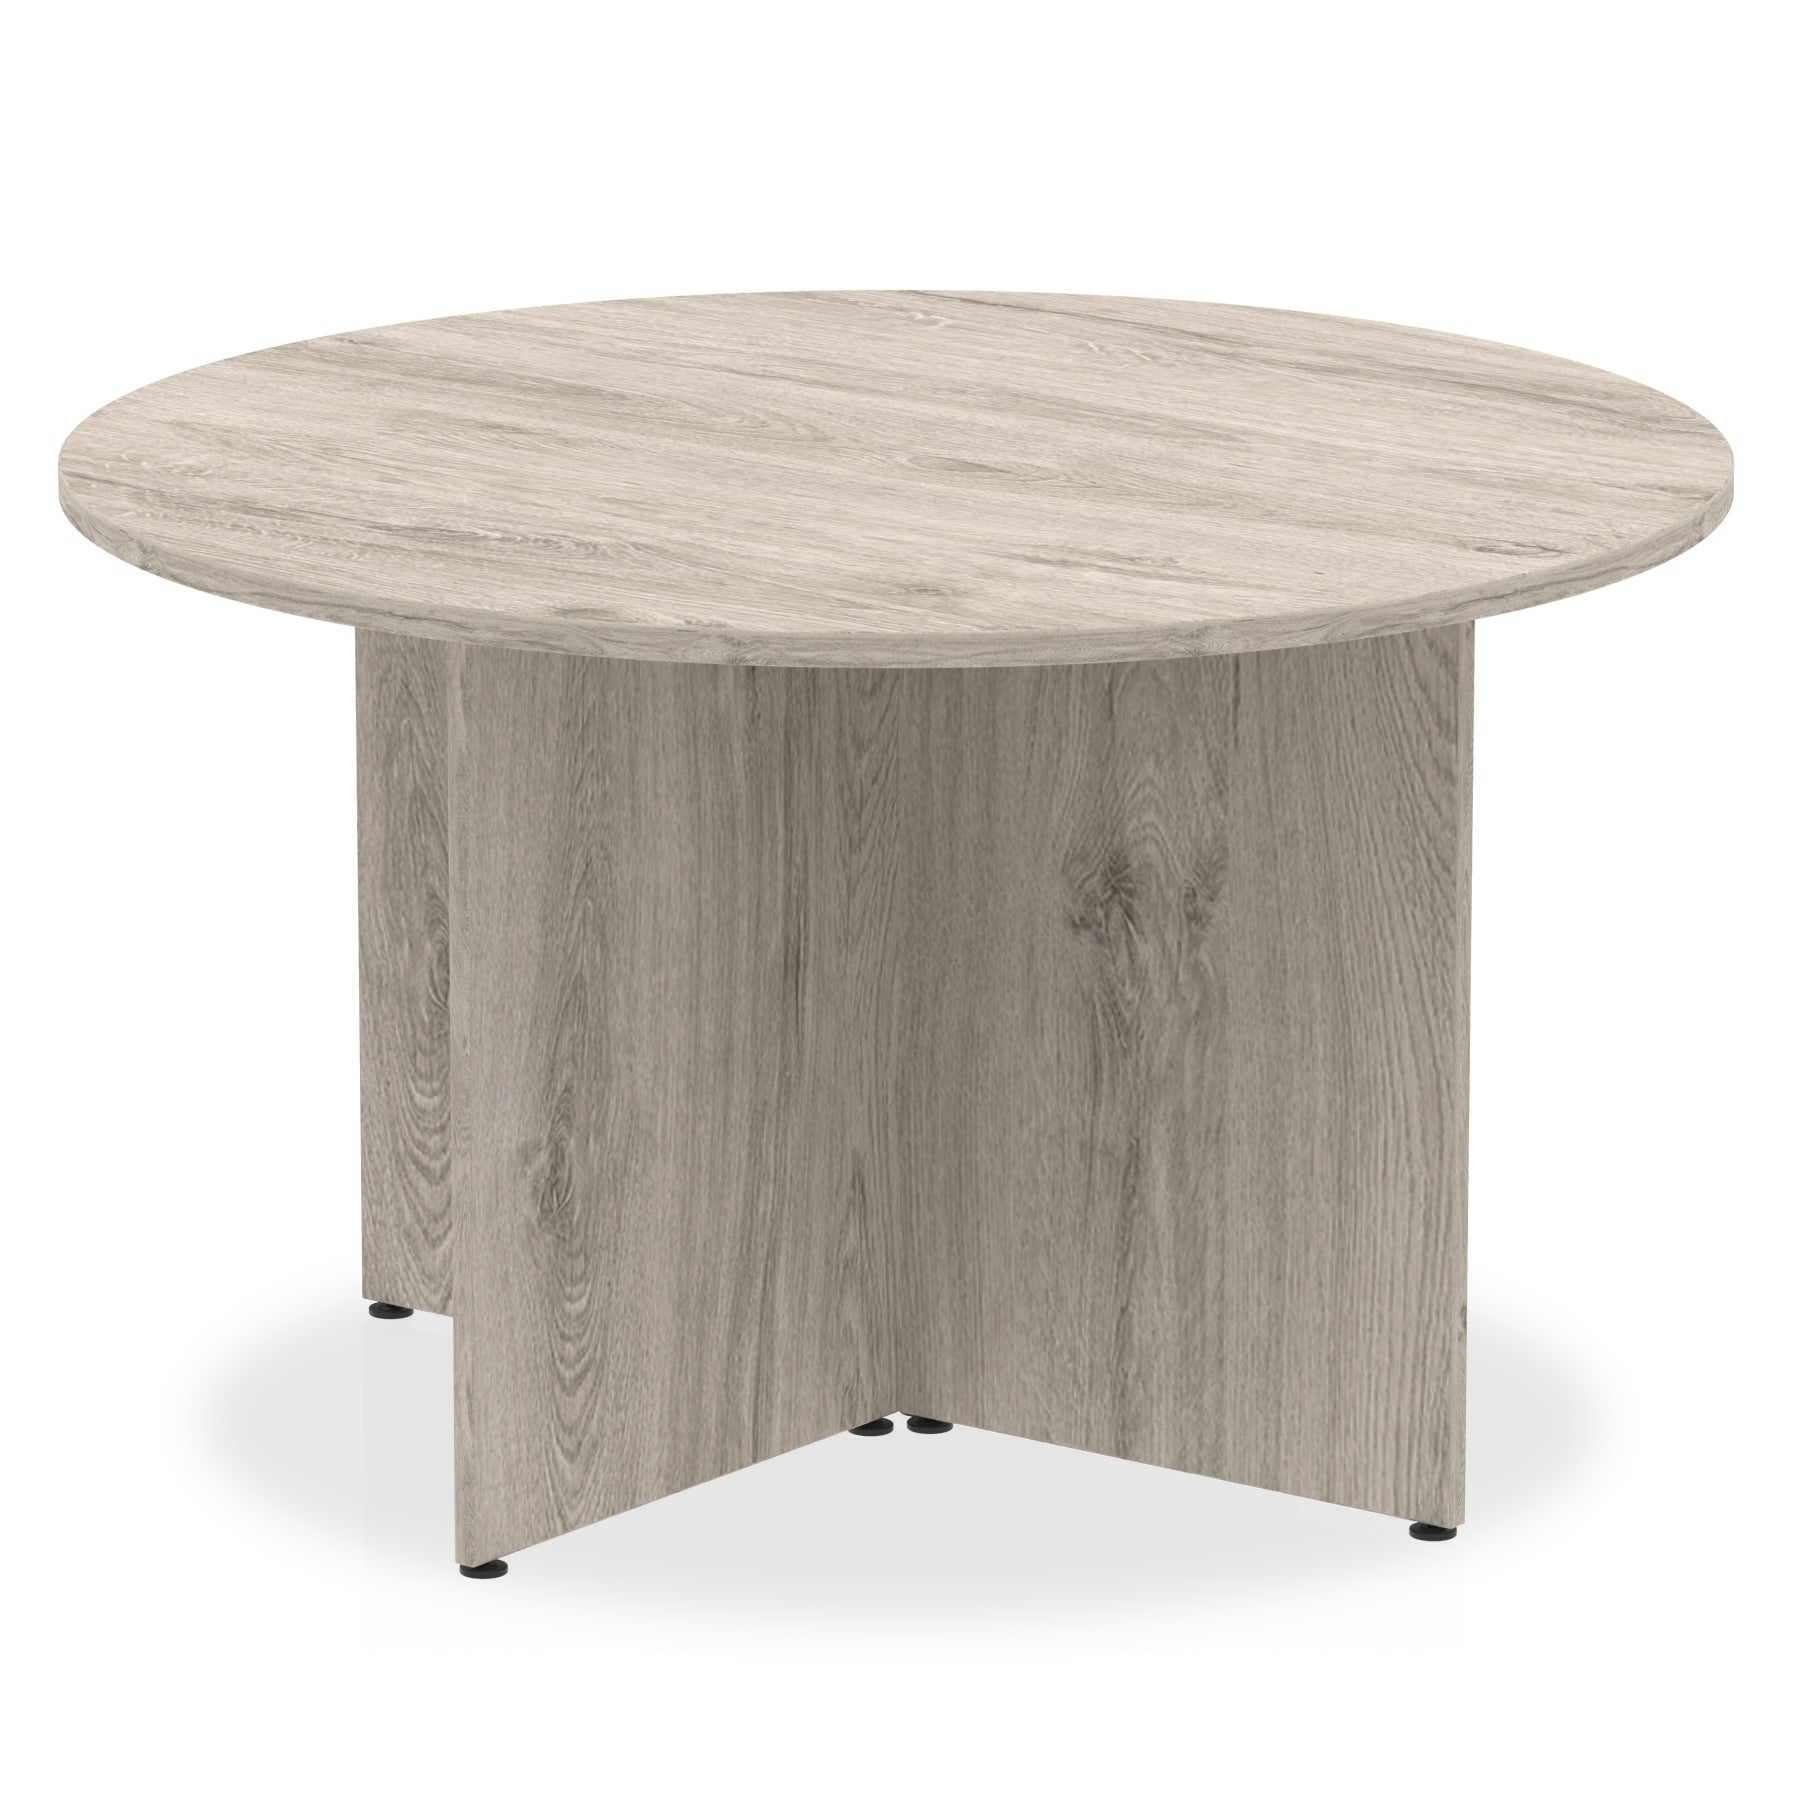 Impulse Round Table Arrowhead Leg - 1000x1000 or 1200x1200 MFC Circular Desk, Self-Assembly, 5-Year Guarantee, 25mm Thickness, 39-47.1kg Weight